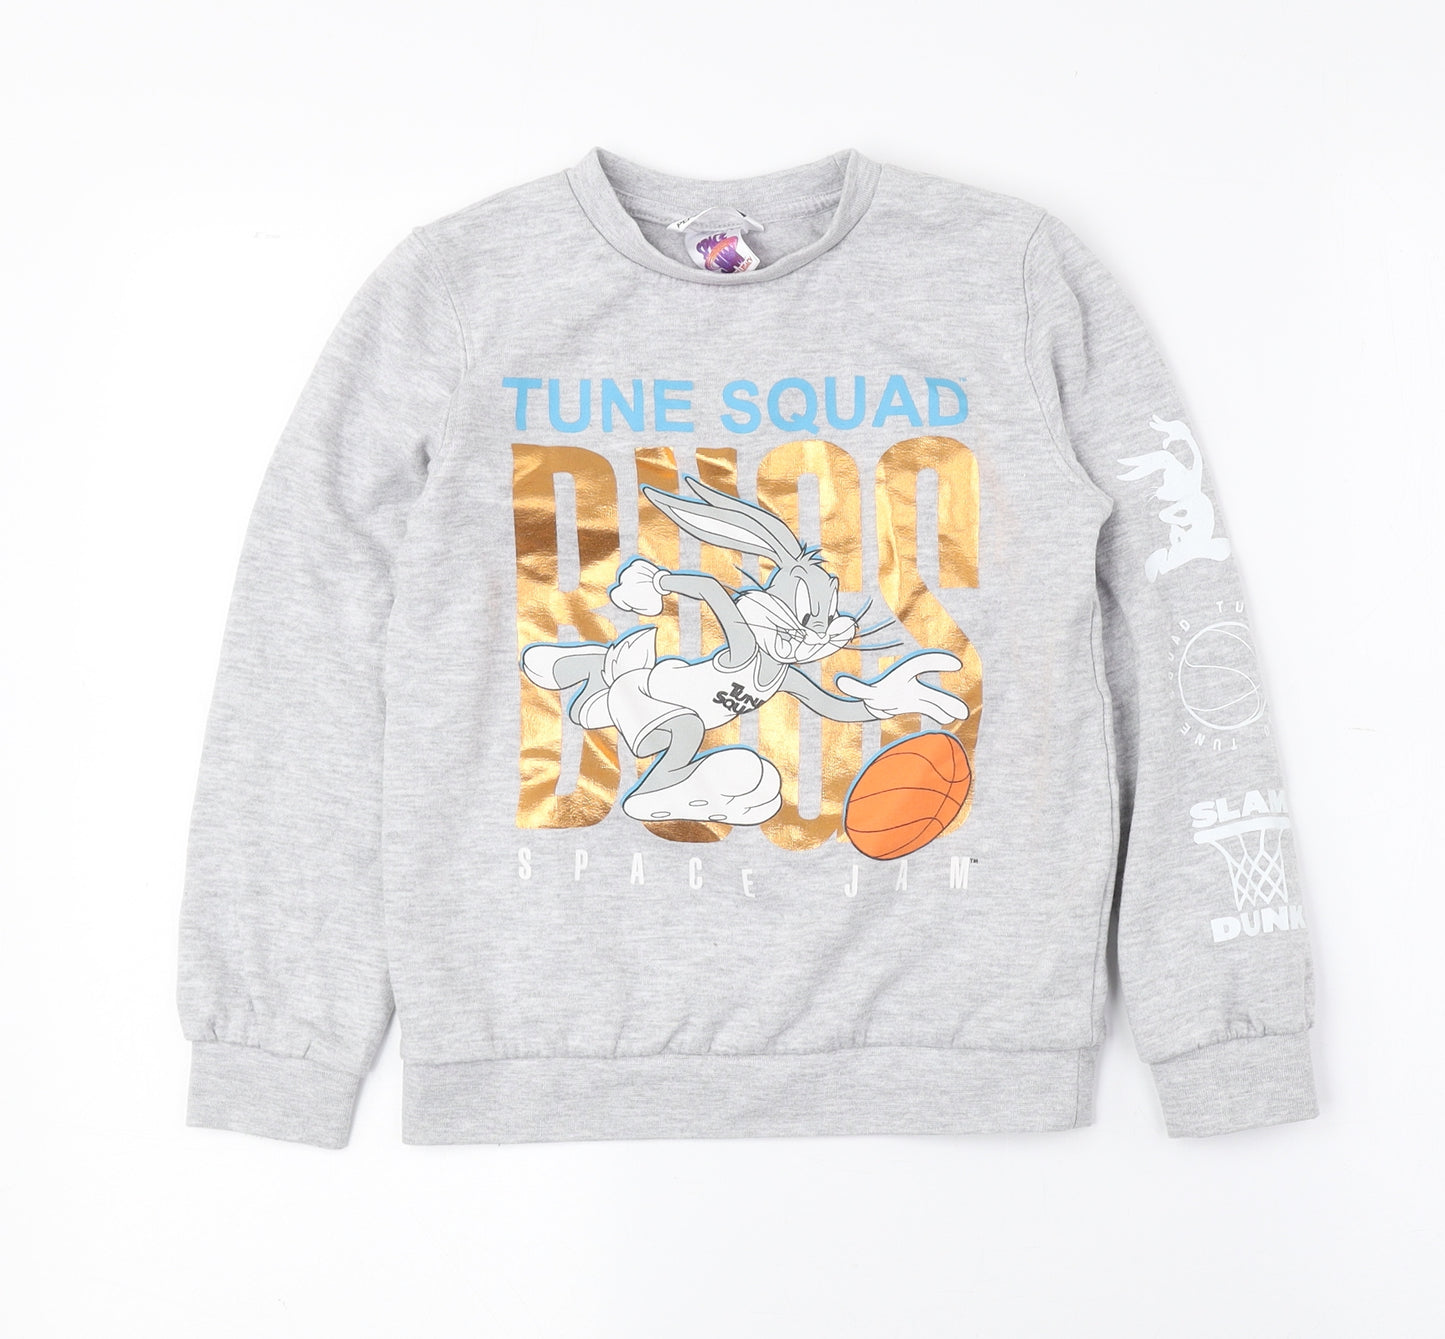 Space Jam Girls Multicoloured Polyester Pullover Sweatshirt Size 6-7 Years Pullover - Space Jam: A New Legacy